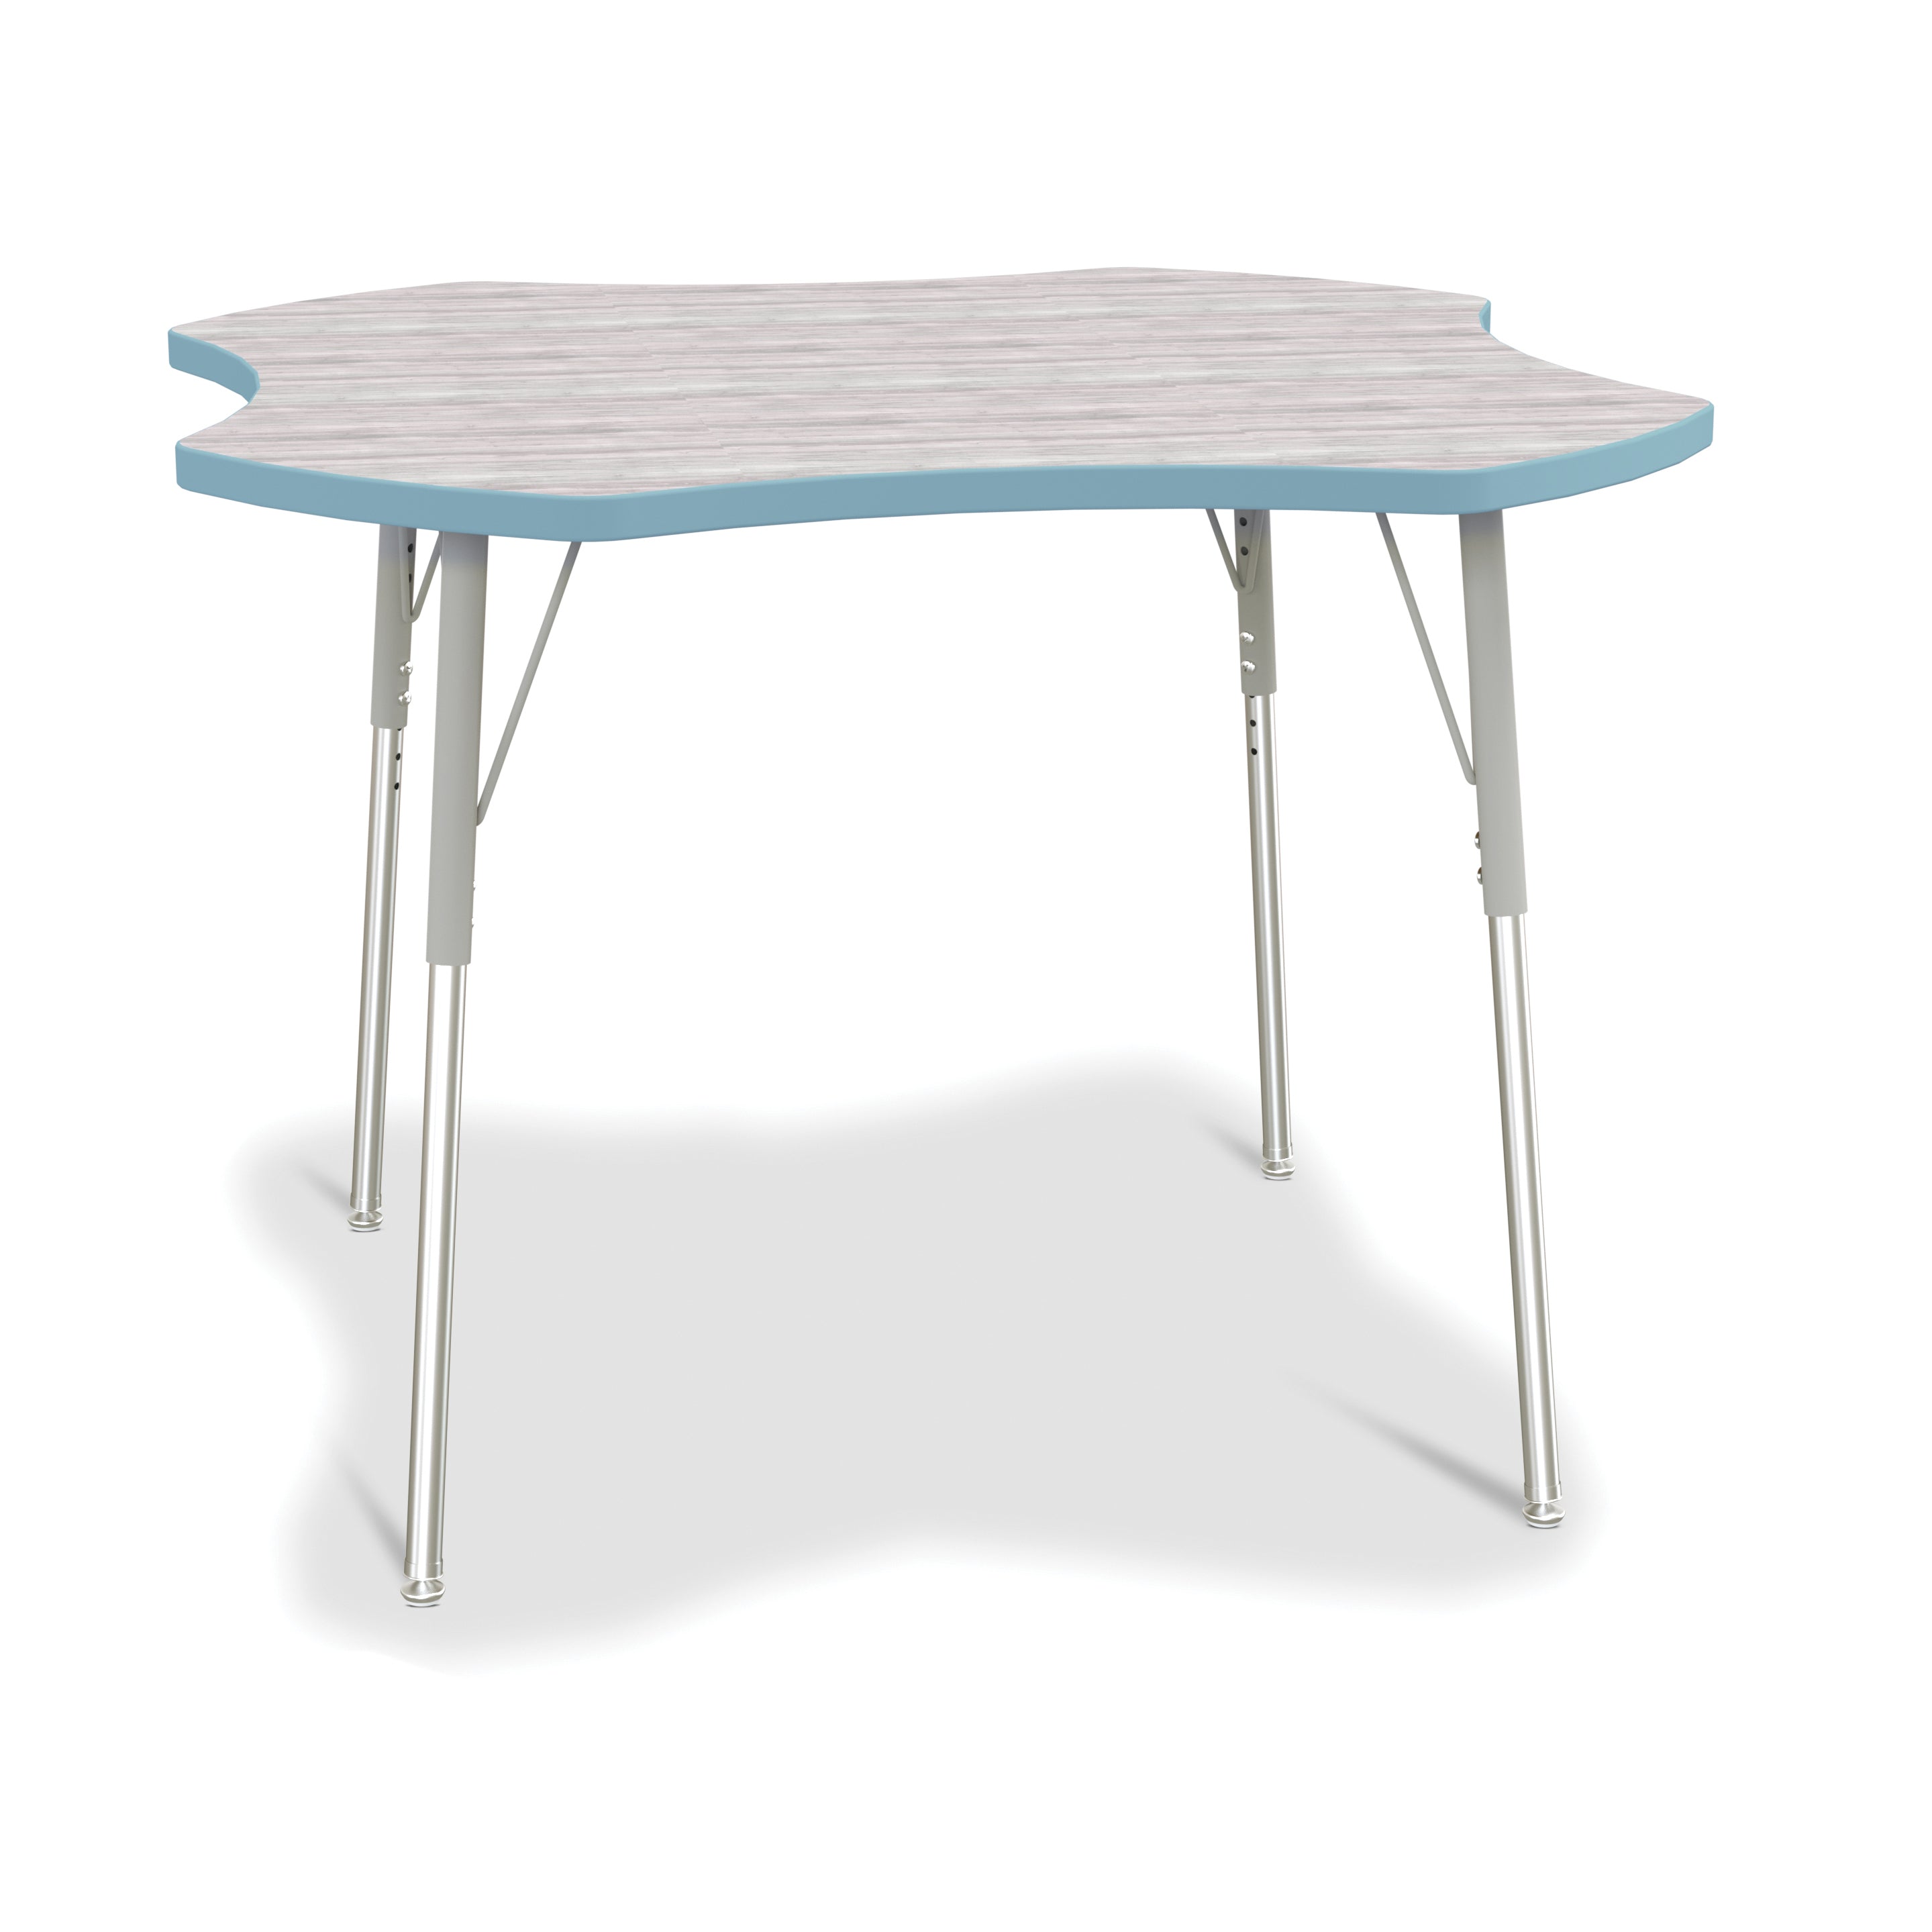 6453JCA452, Berries Four Leaf Activity Table - A-height - Driftwood Gray/Coastal Blue/Gray